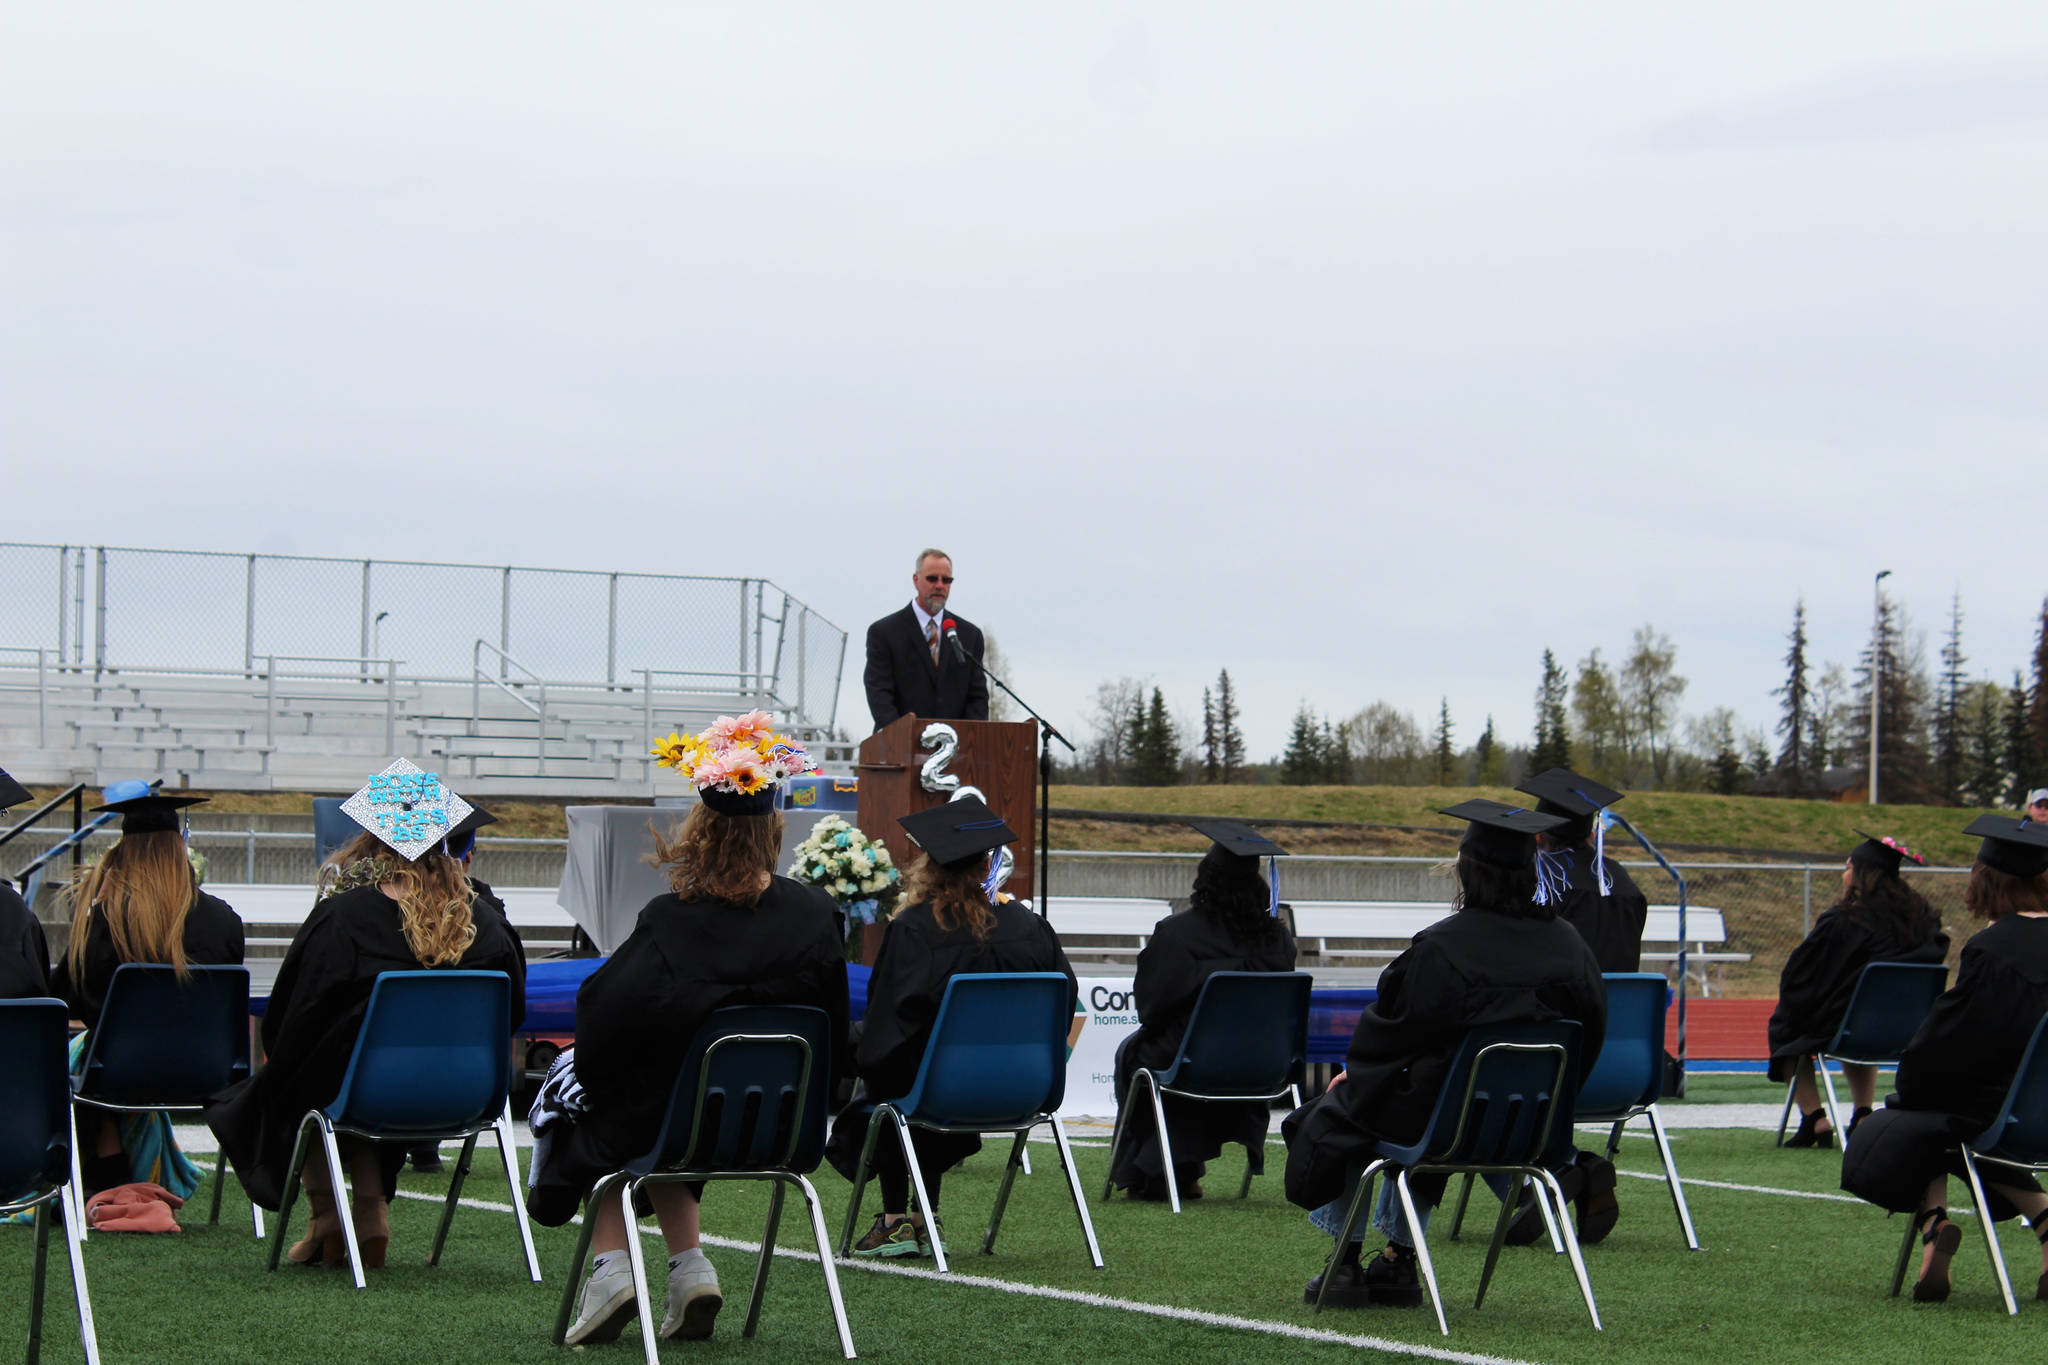 Connections Homeschool Principal Rich Bartolowits speaks to graduates during their graduation ceremony at Soldotna High School on Thursday, May 20, 2021. (Ashlyn O’Hara/Peninsula Clarion)